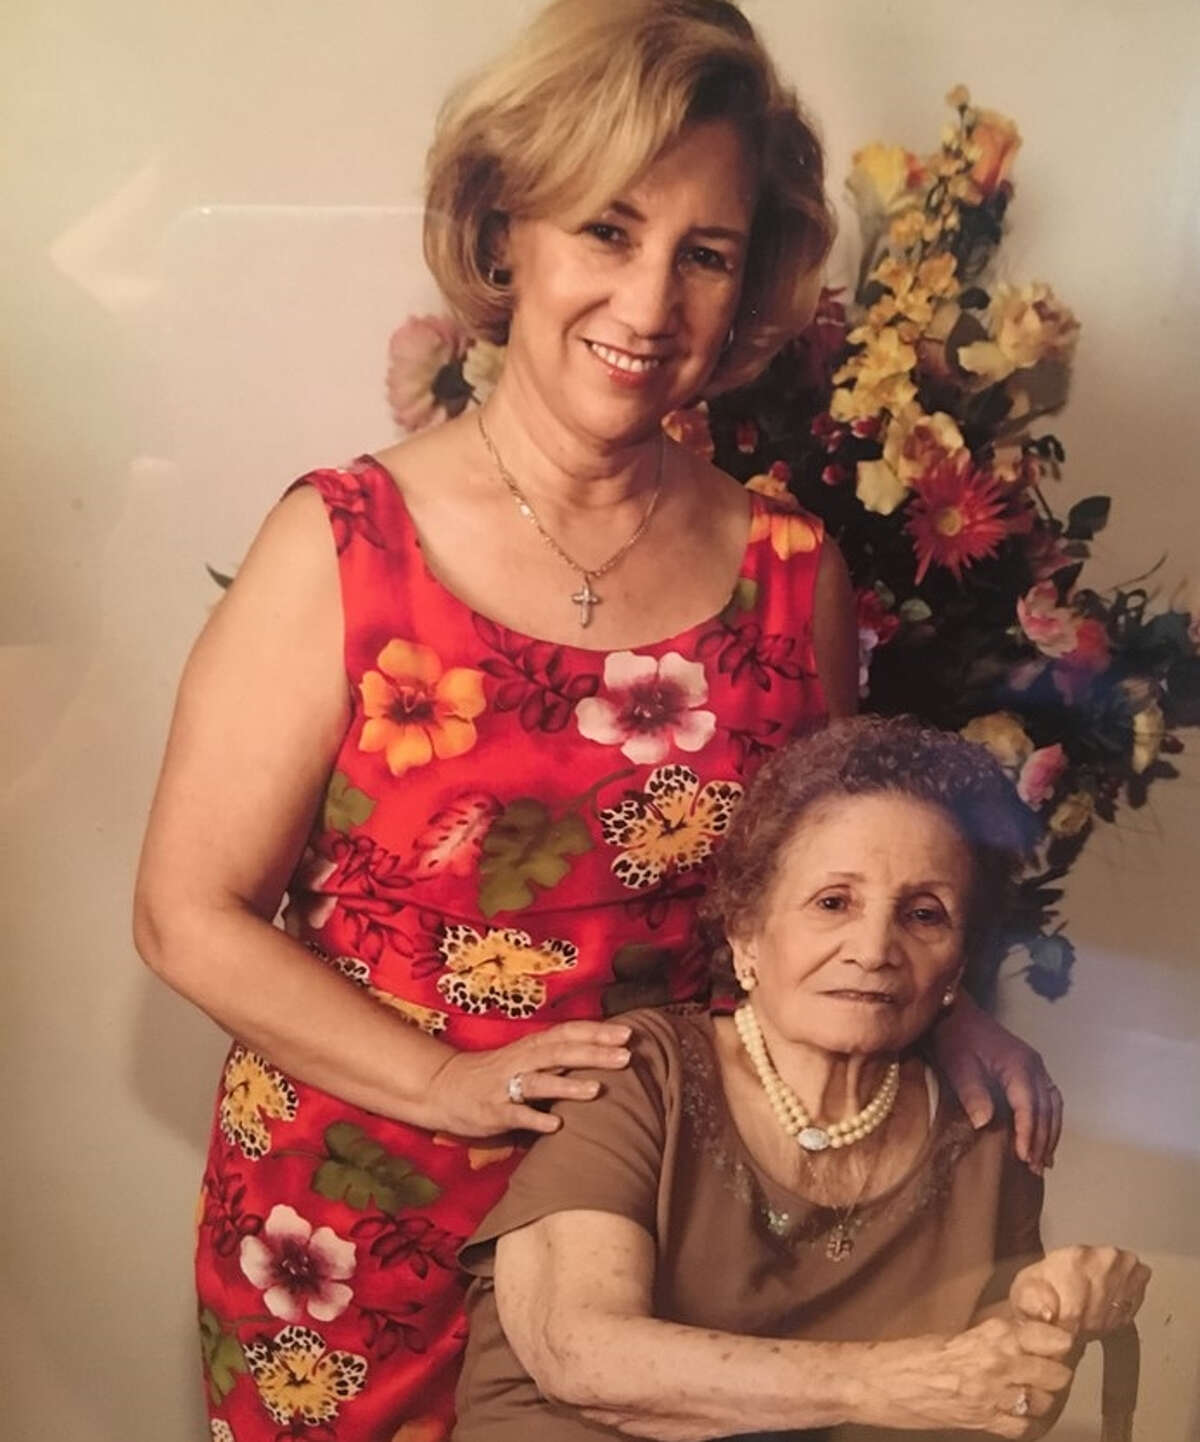 San Antonio Avon representative Esther Cantu (left) with her mother Josephine Perez. Perez sold Avon for more than 50 years, right up to her death in 2015 at age 98. Cantu took over her mom's customer base when she died and has sold Avon ever since.